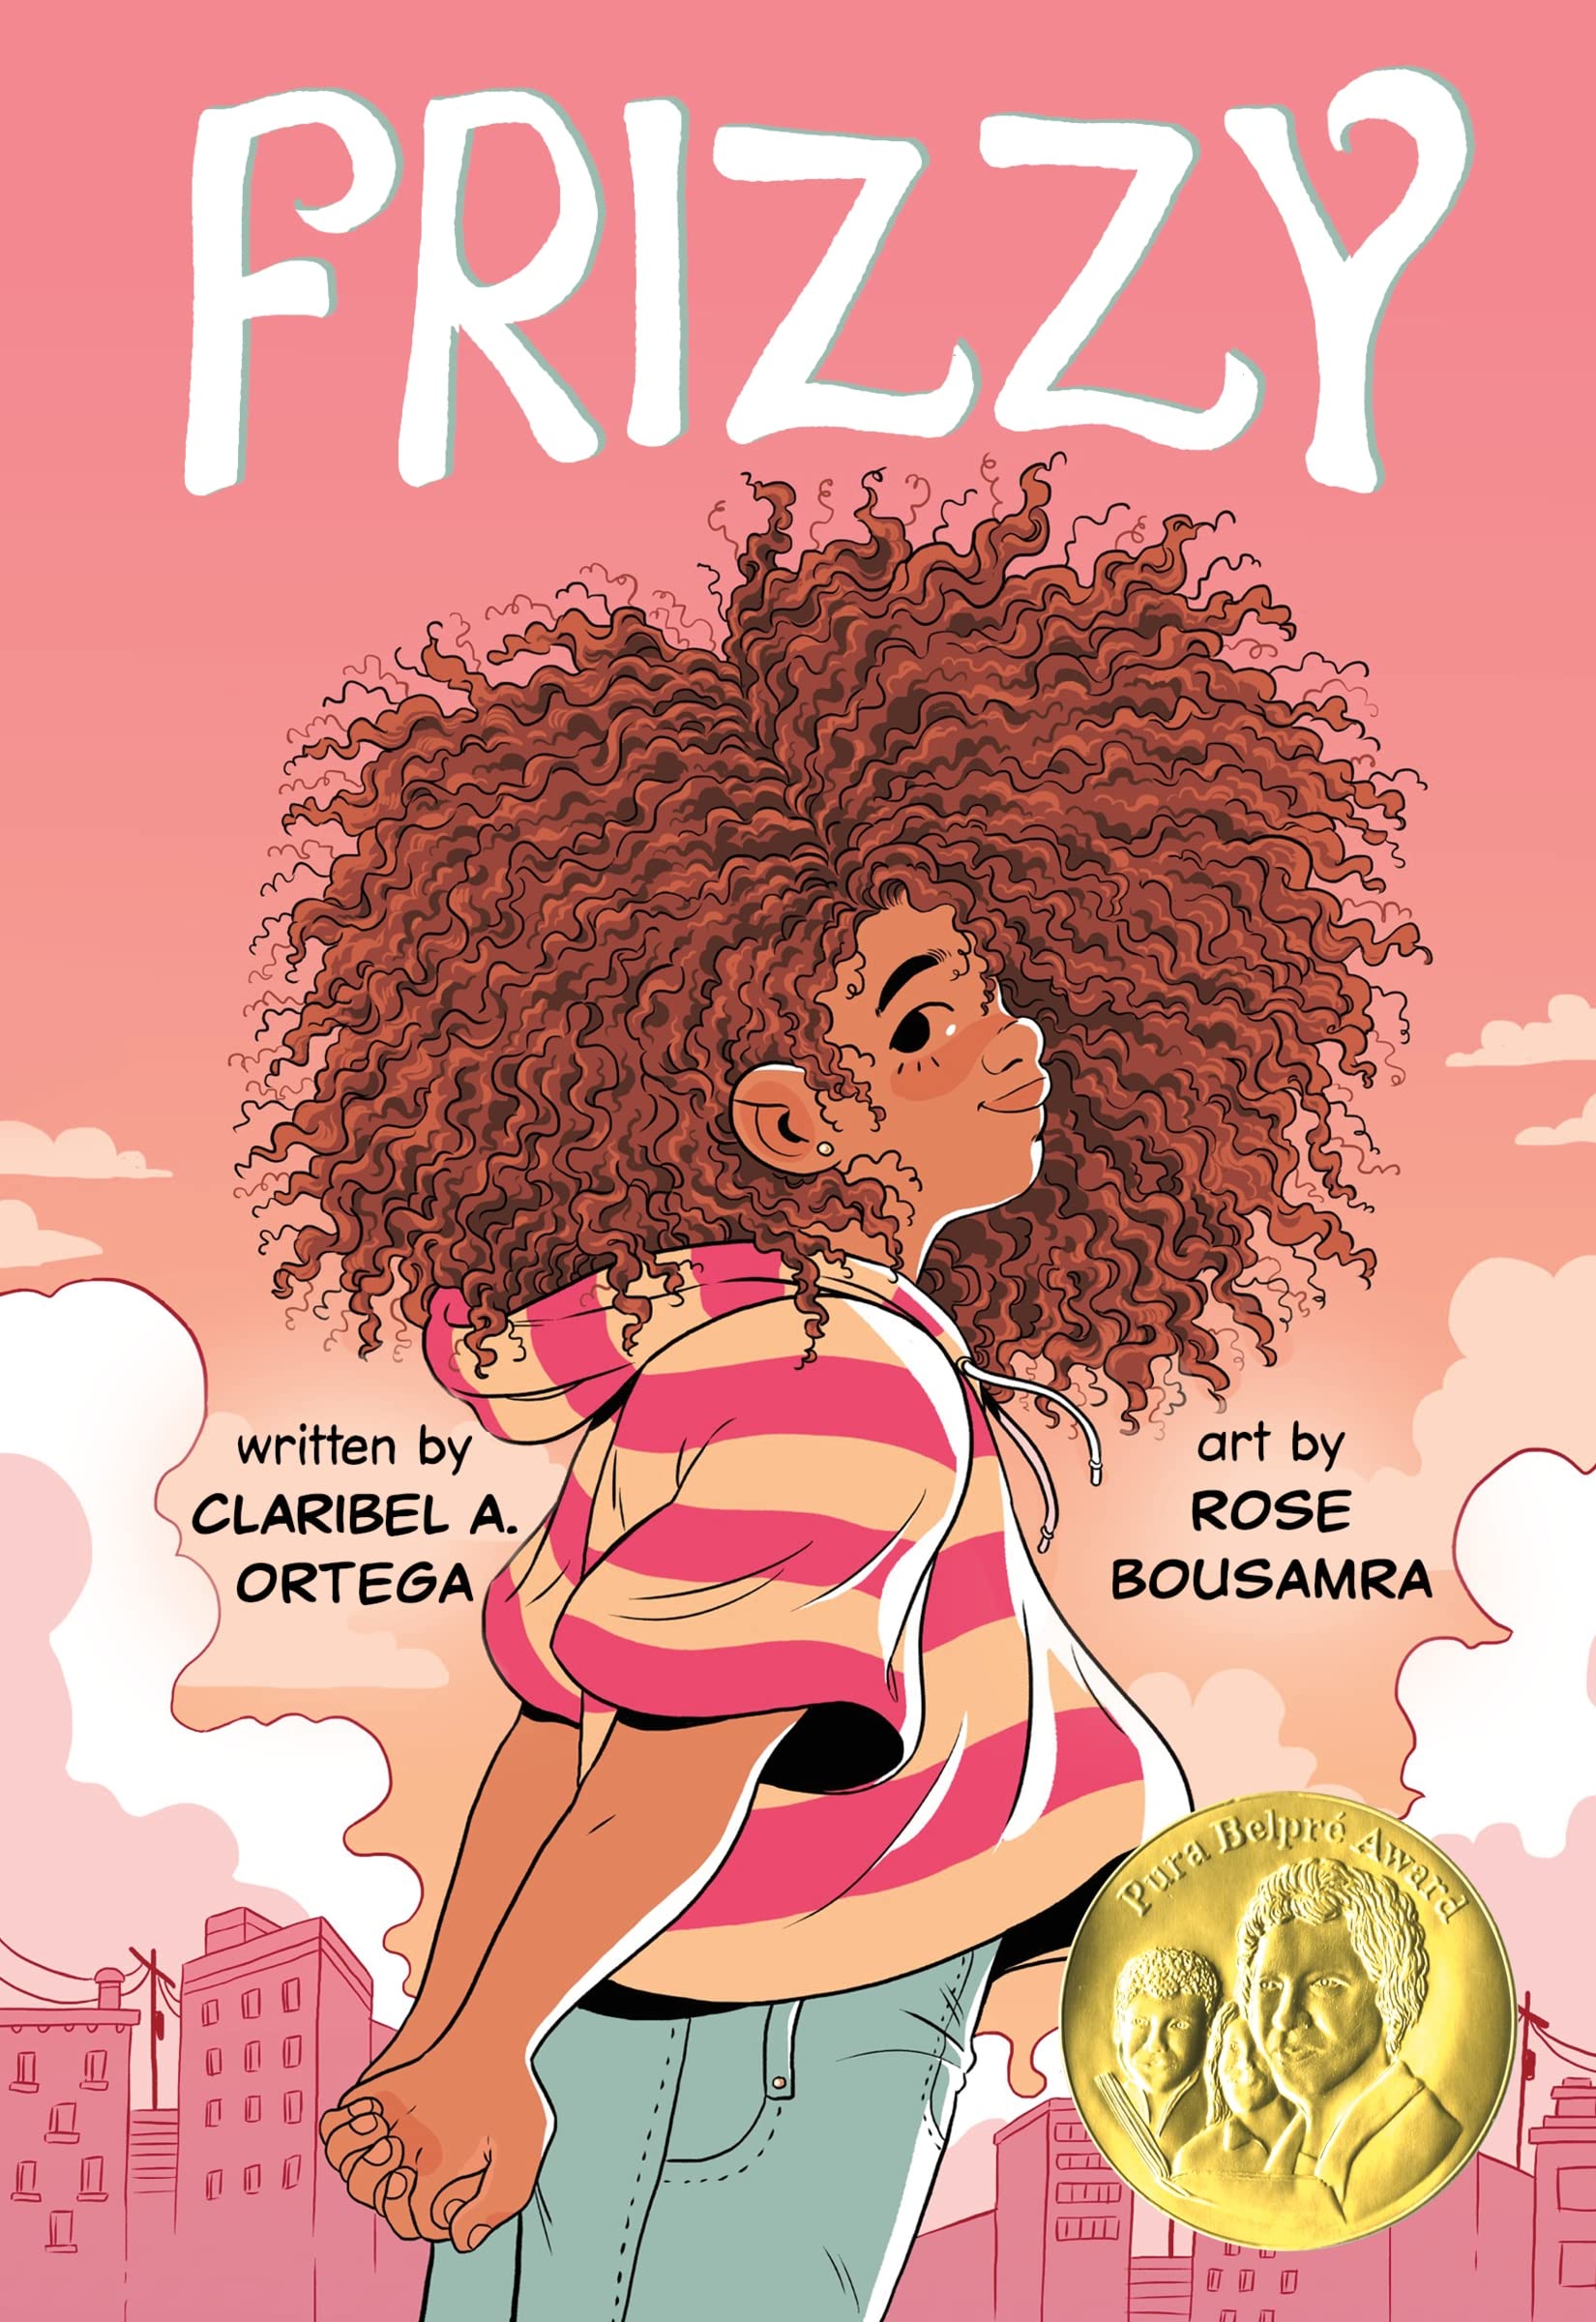 Cover of "Frizzy" by Claribel A. Ortega